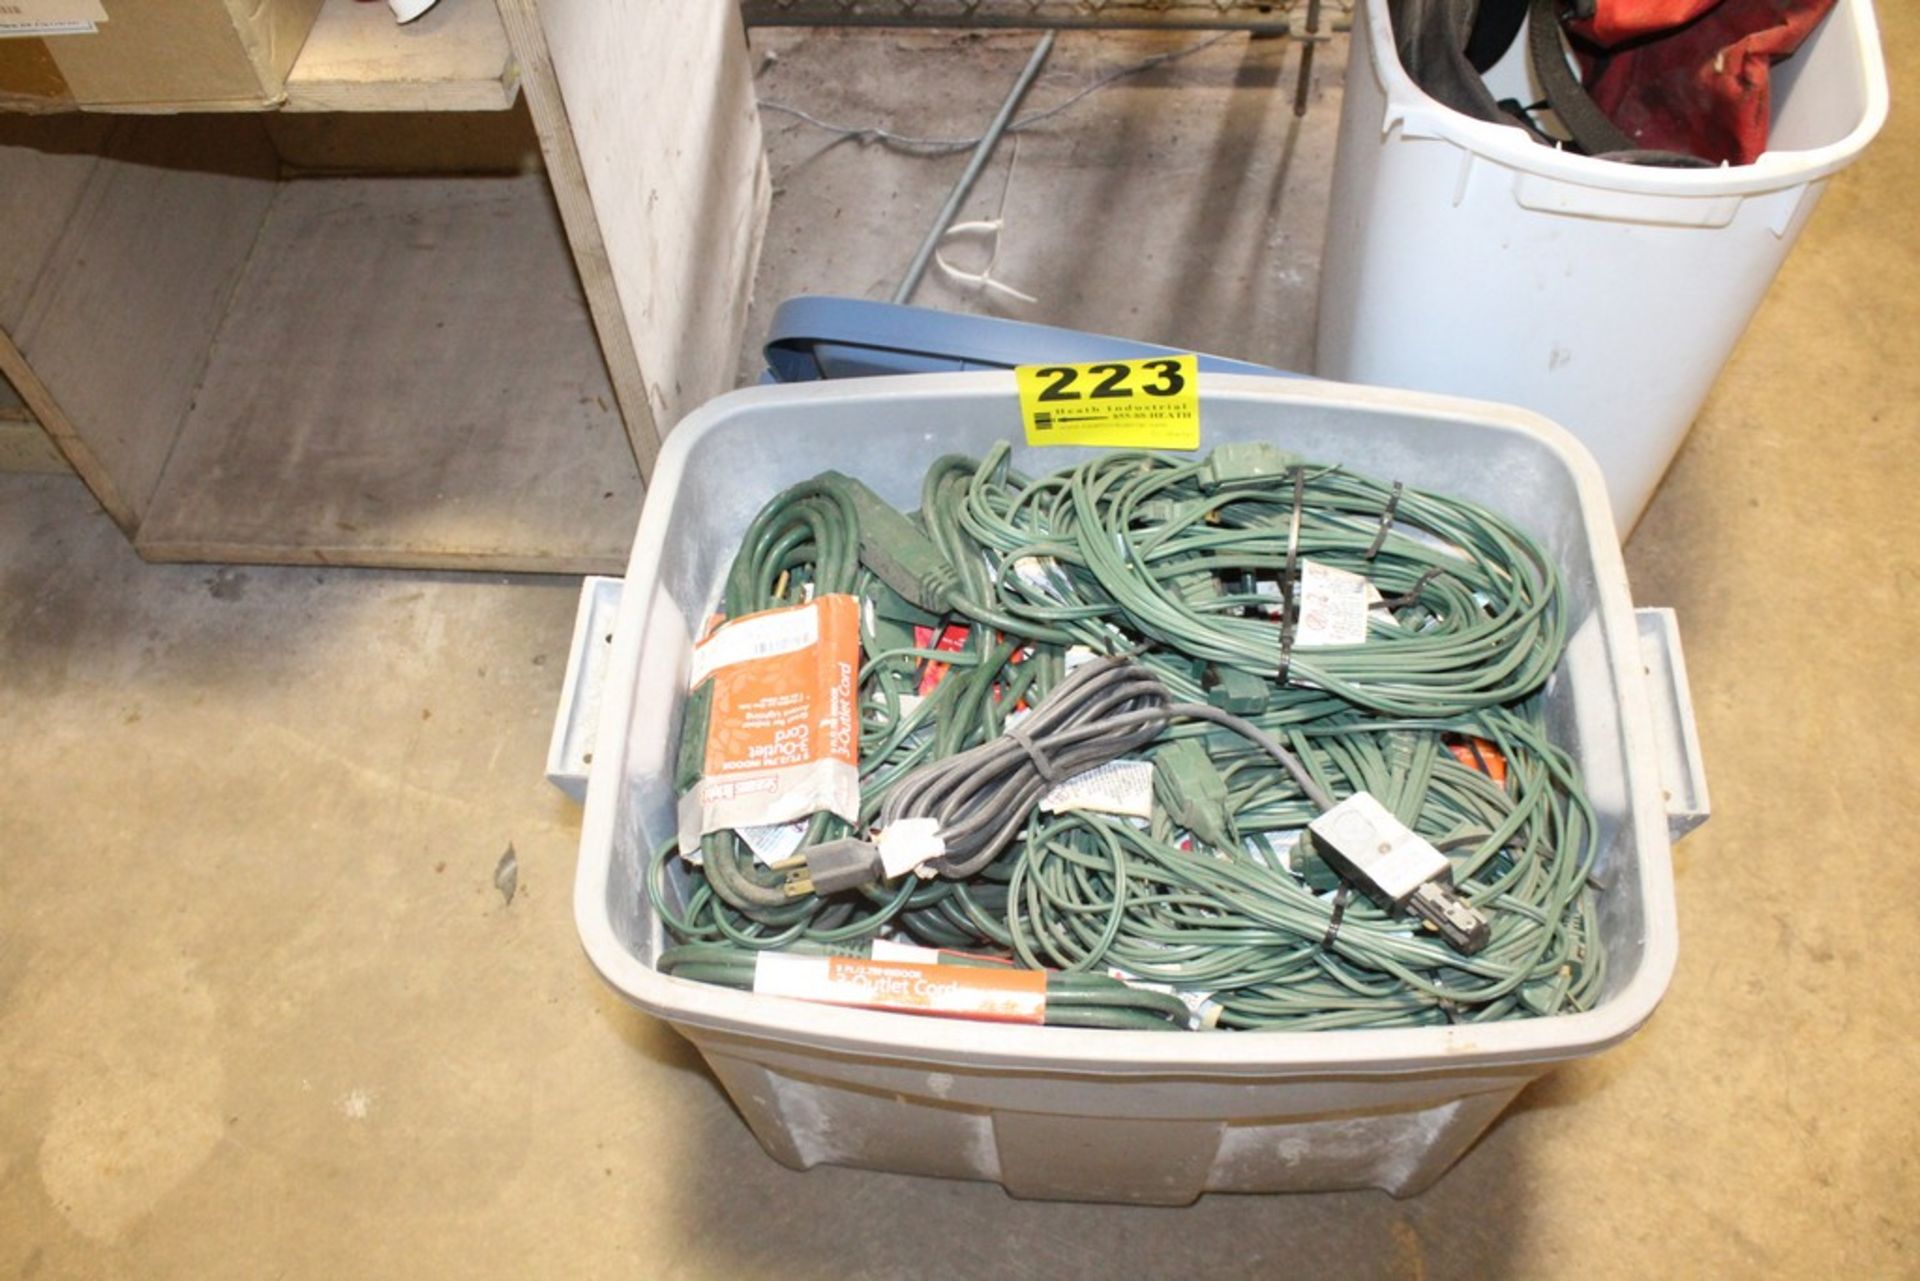 LARGE QTY OF EXTENSION CORDS IN BIN, WITH BIN